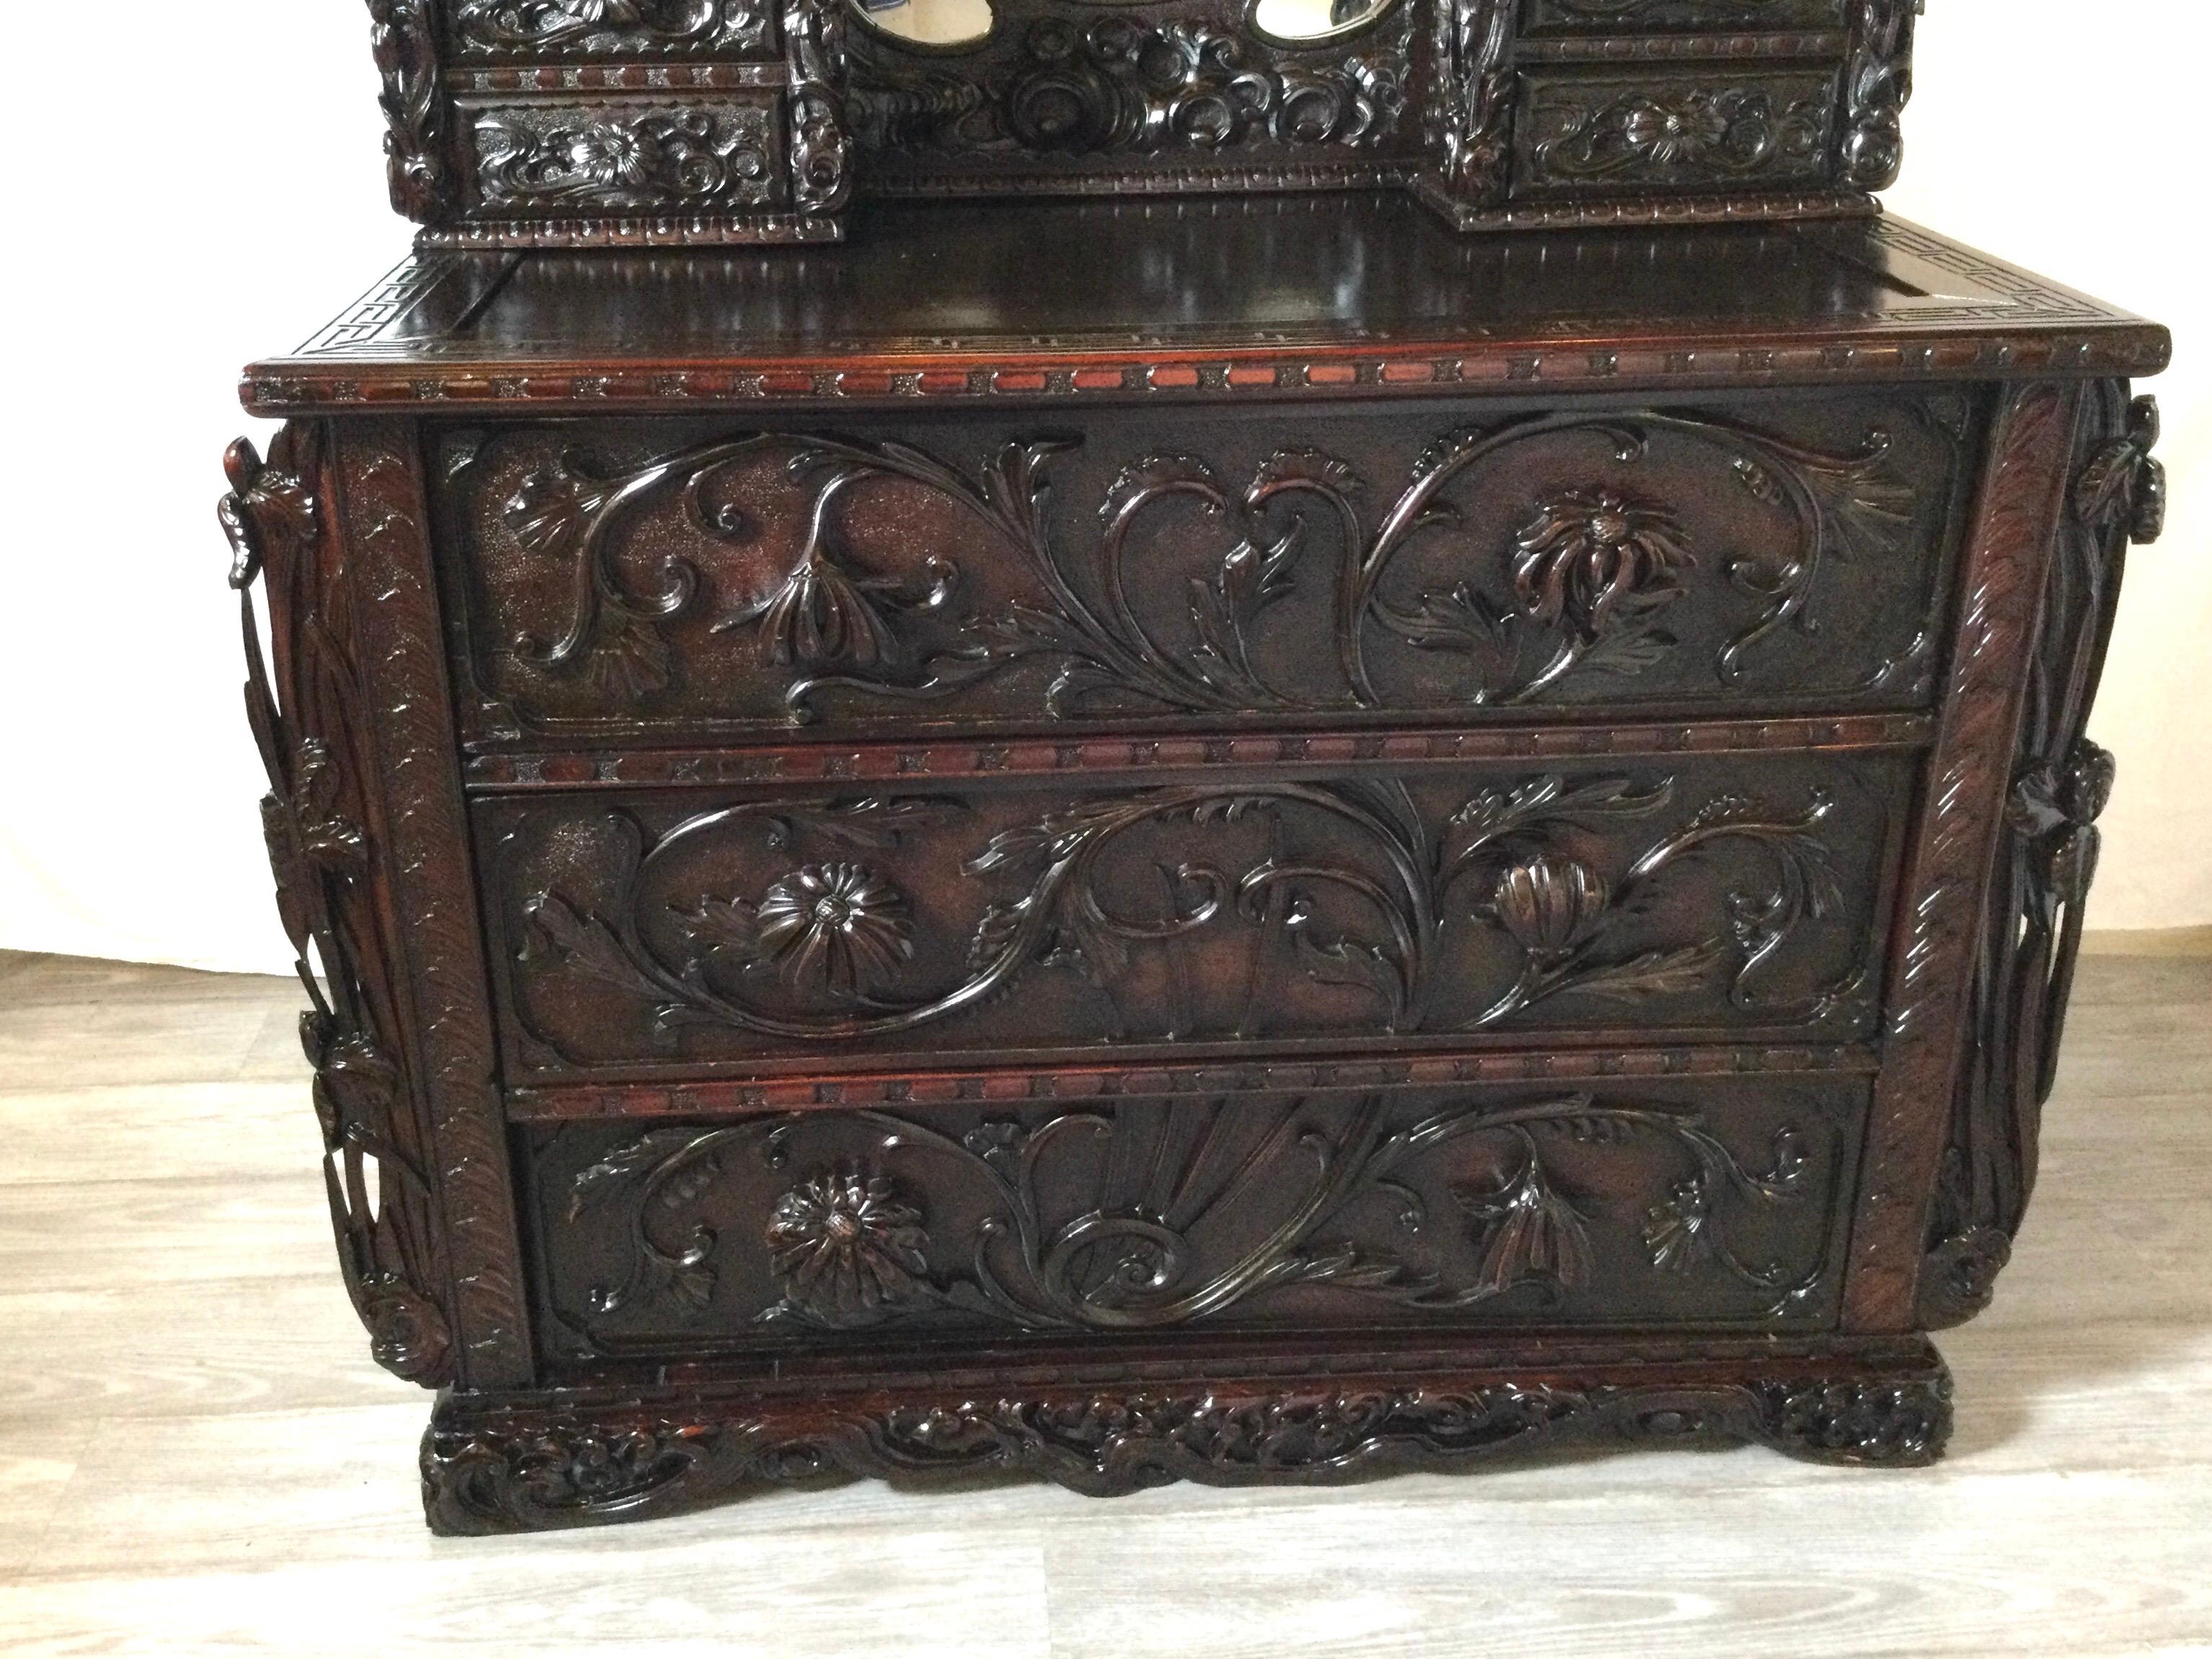 20th Century Early 20th C. Heavily Carved Japanese Chest of Drawers with Mirror